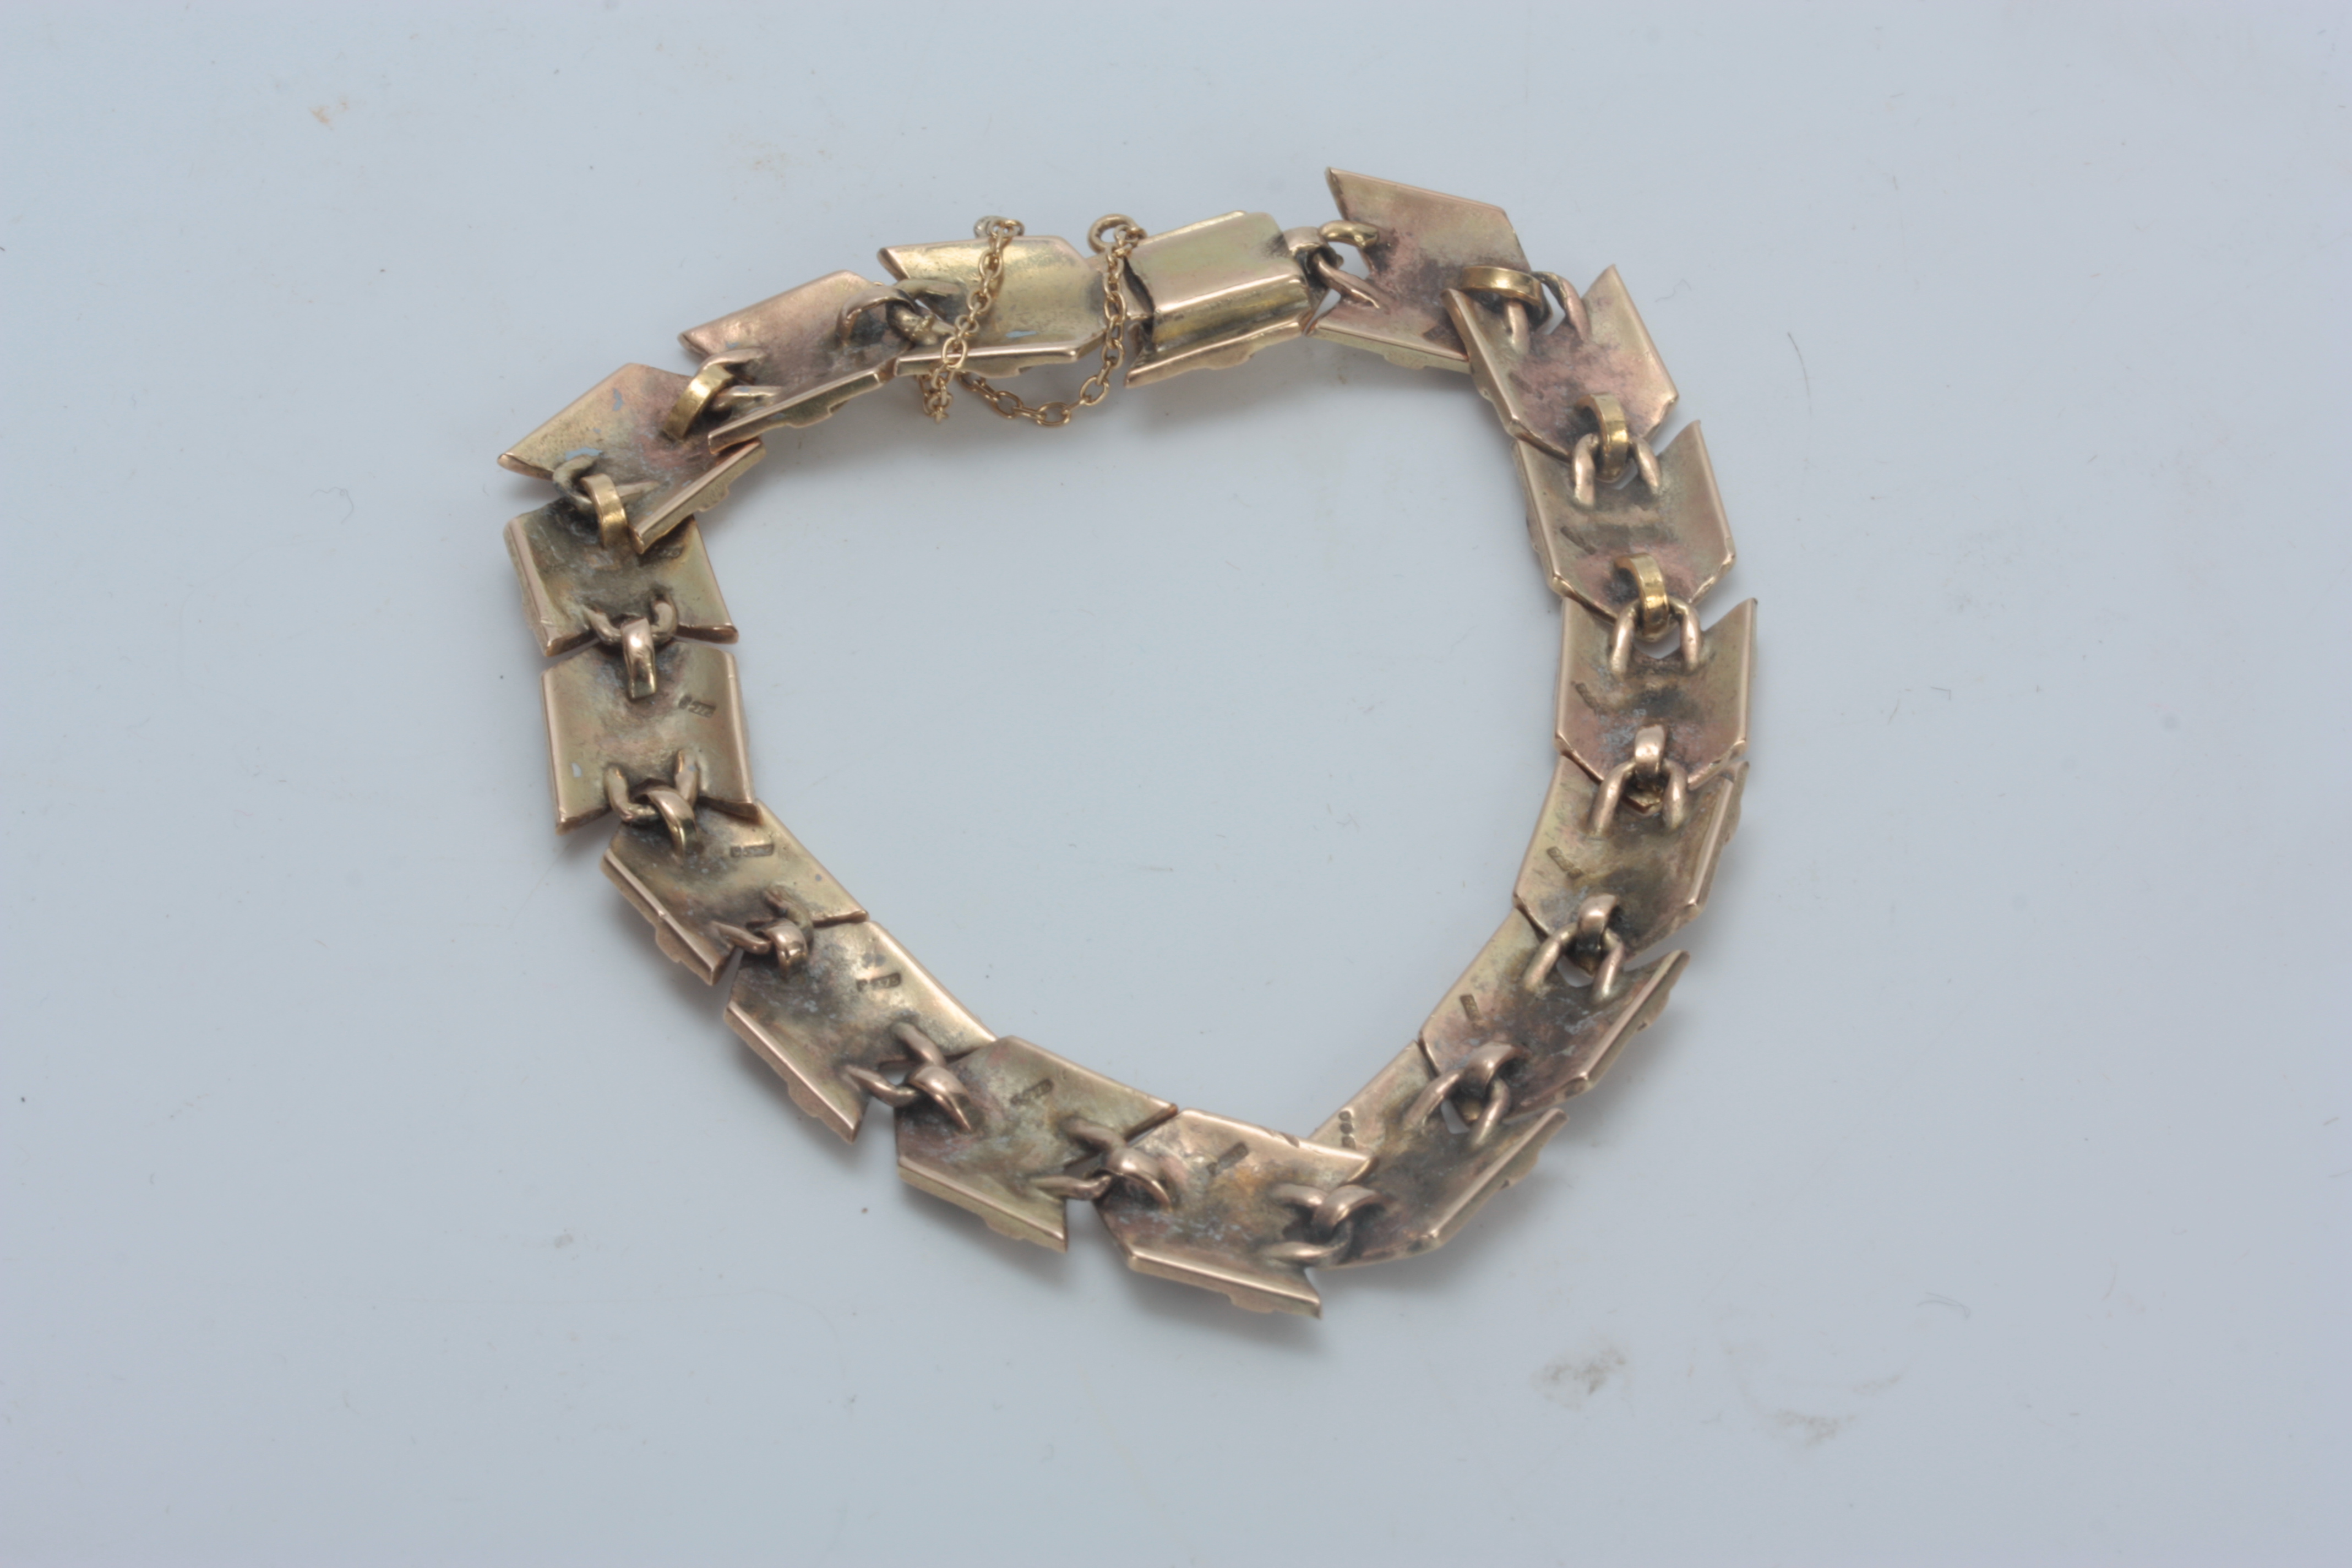 A LADIES 9CT GOLD BRACELET with arrowhead links app. 22g - Image 4 of 4